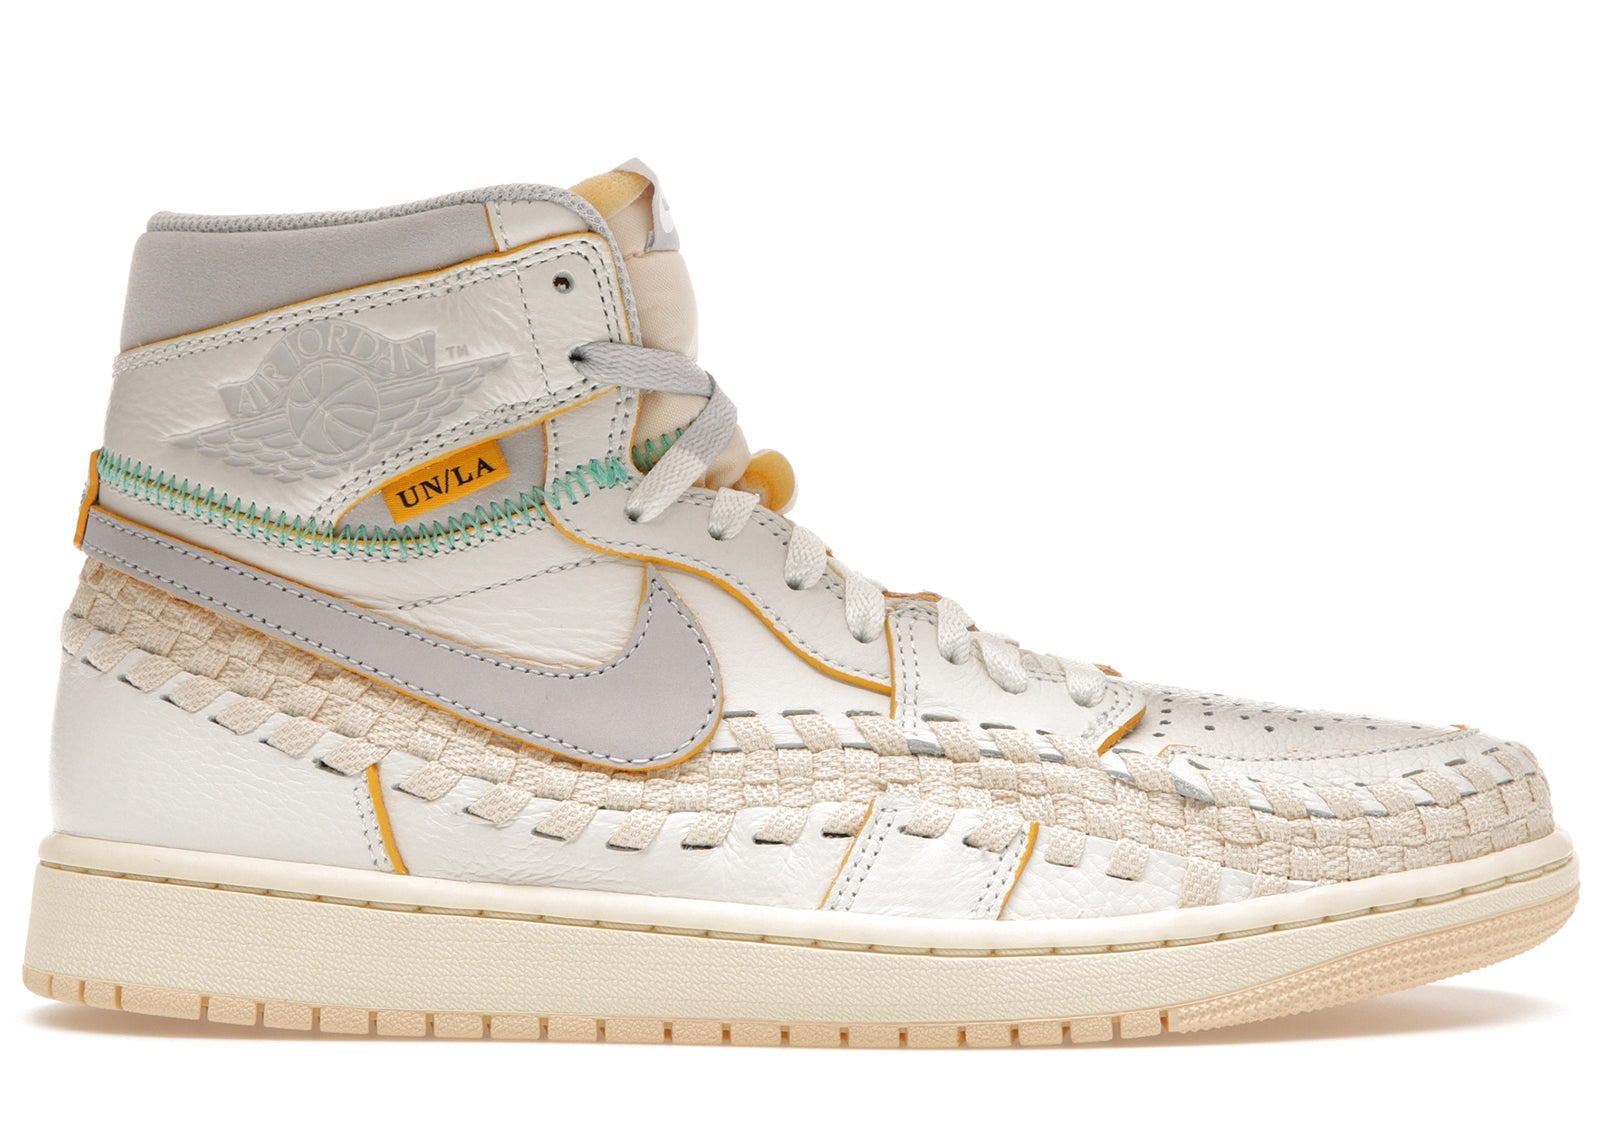 JORDAN 1 ELEVATE HIGH SP UNION LA BEPHIES BEAUTY SUPPLY THE SUMMER OF